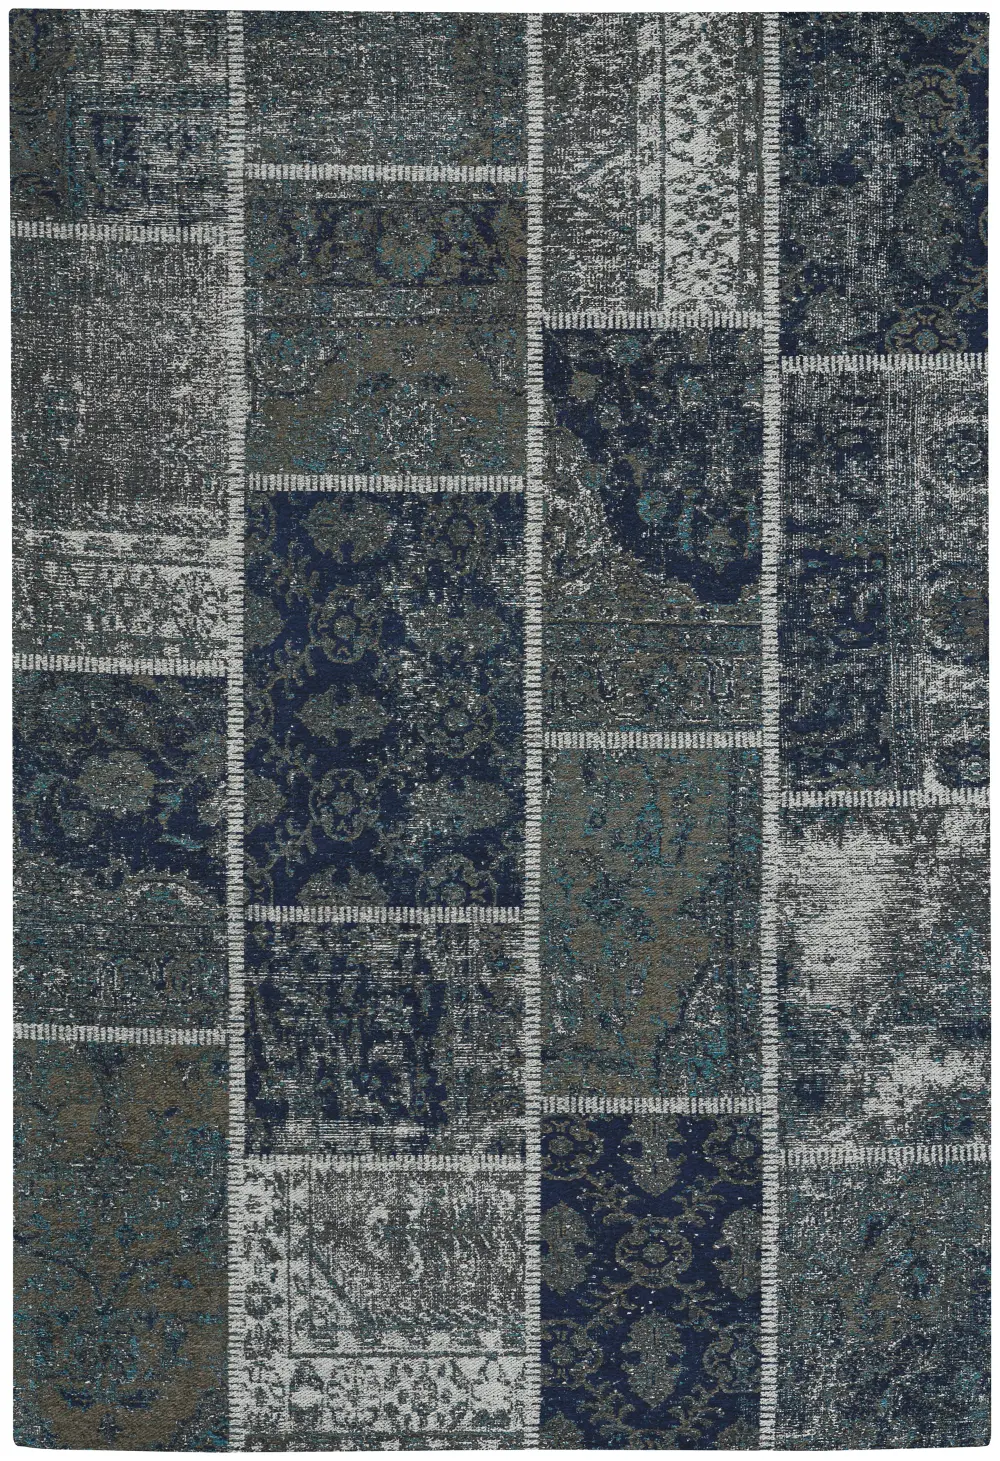 3246RS05000800400 5 x 8 Medium Gray and Blue Rug - Cosmic-Patchwork-1